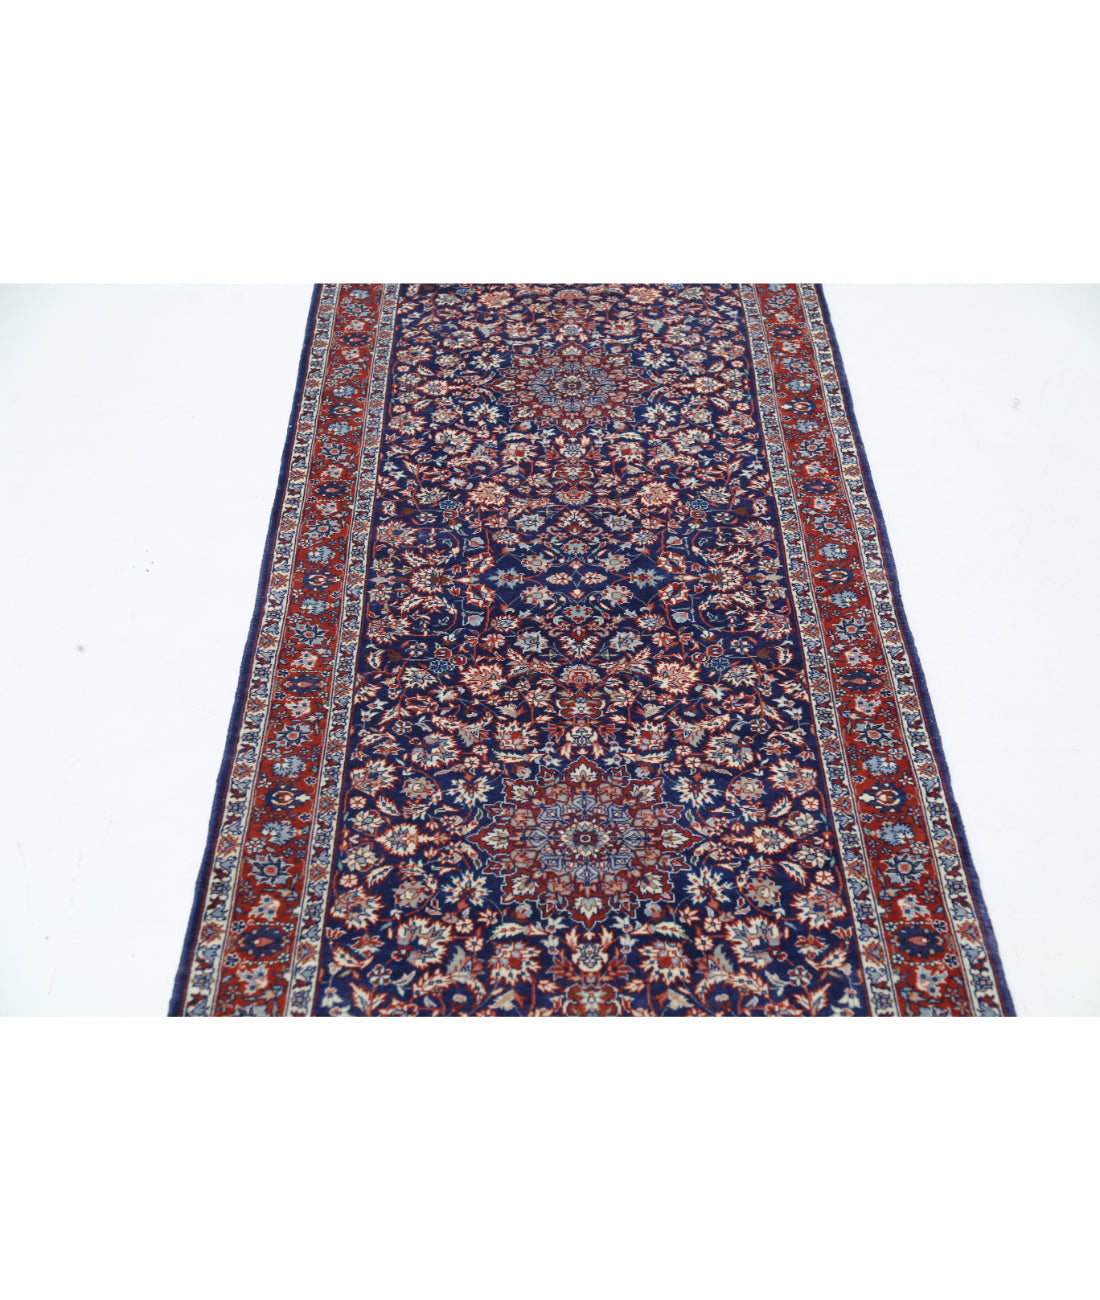 Hand Knotted Heritage Fine Persian Style Wool Rug - 2'8'' x 13'4'' 2' 8" X 13' 4" (81 X 406) / Blue / Rust